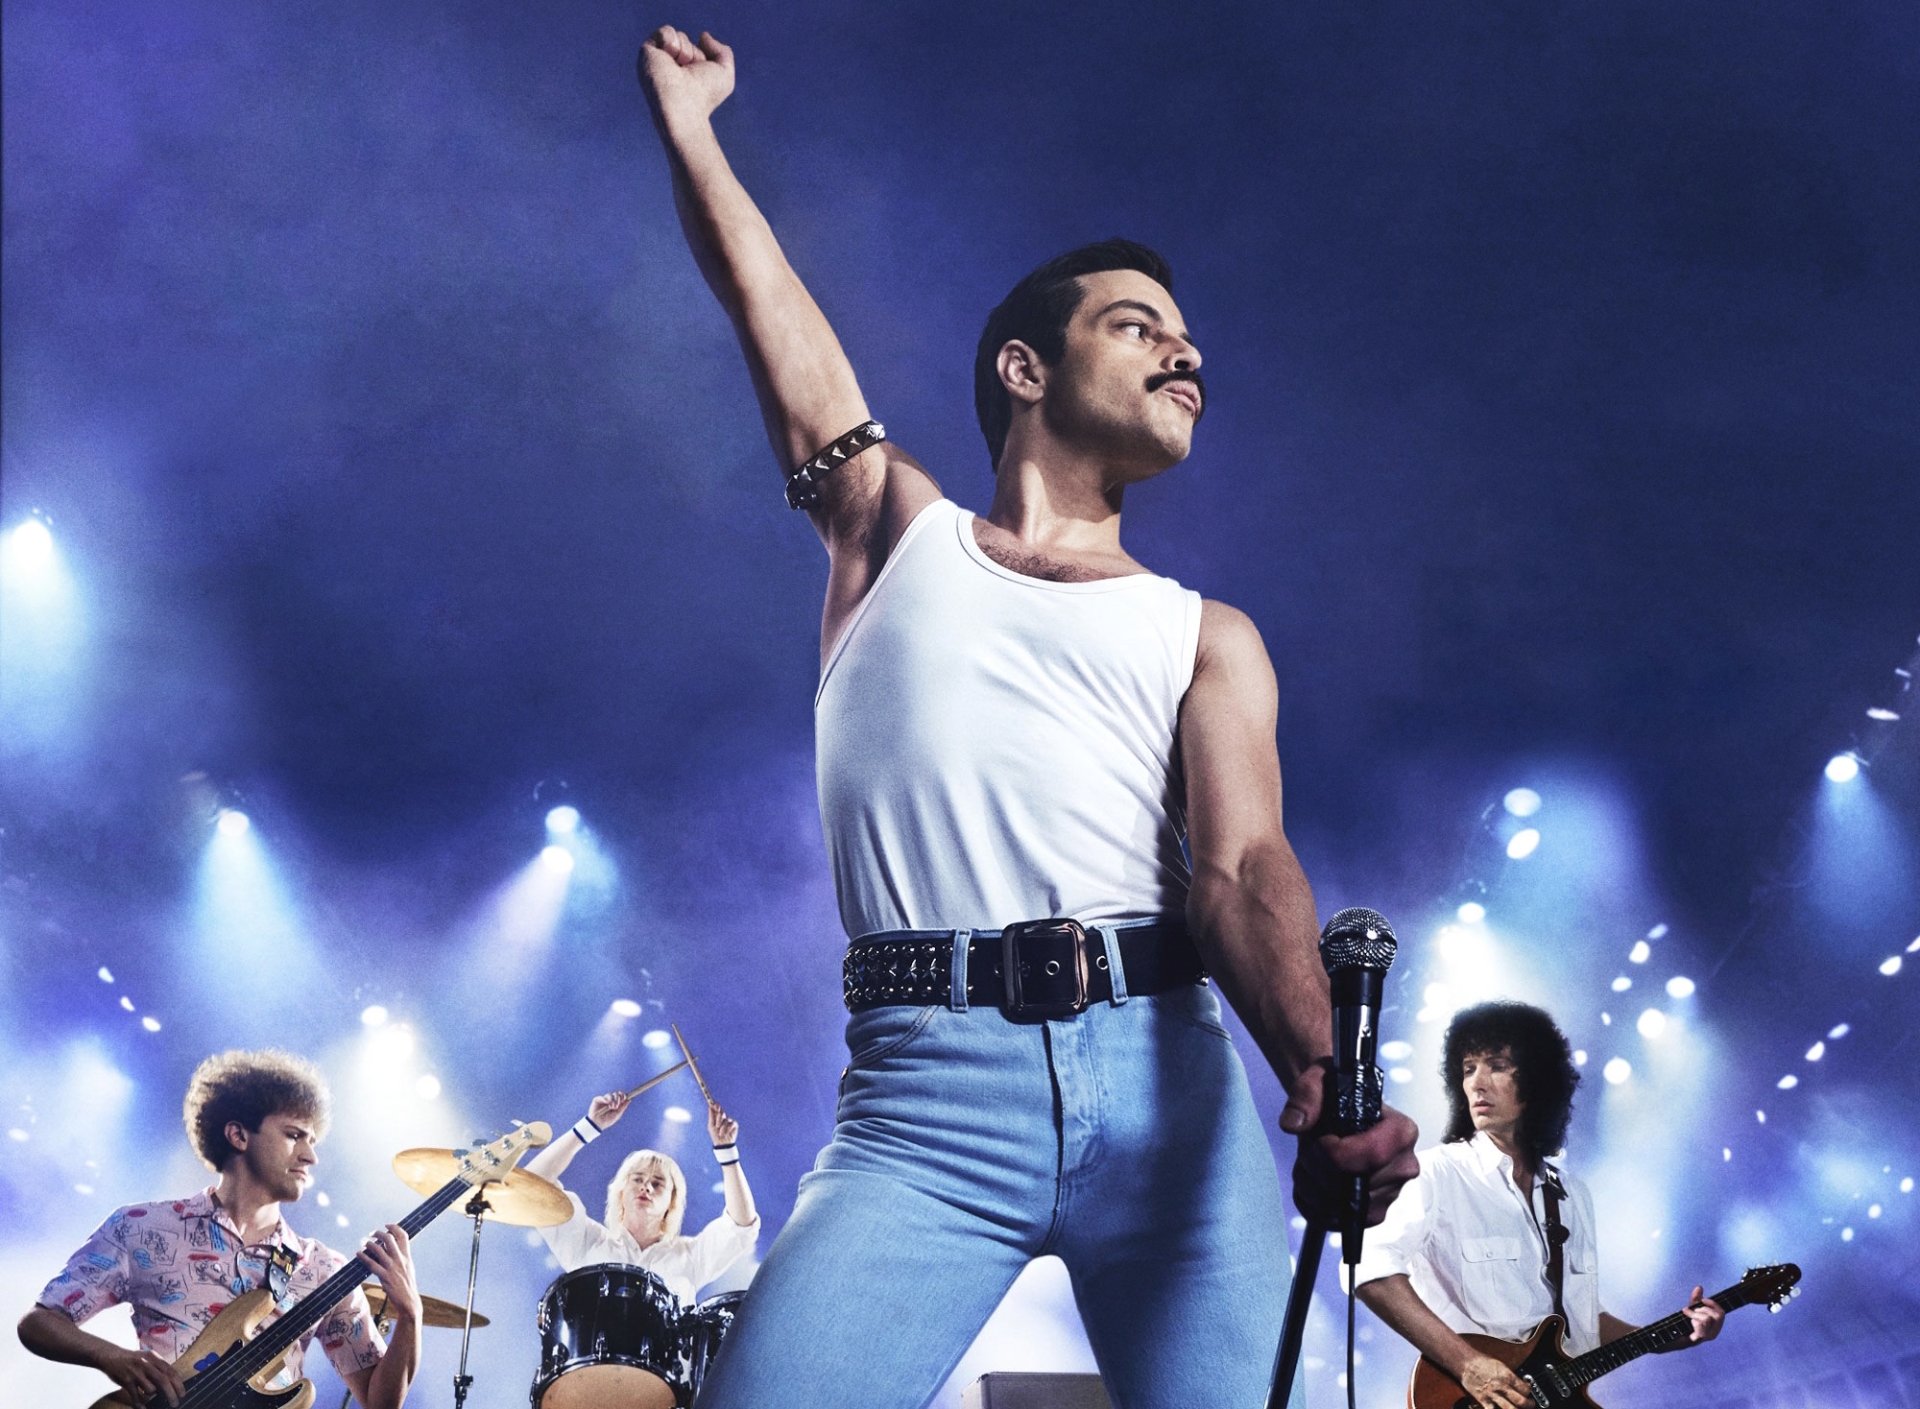 Bohemian Rhapsody download the new version for apple